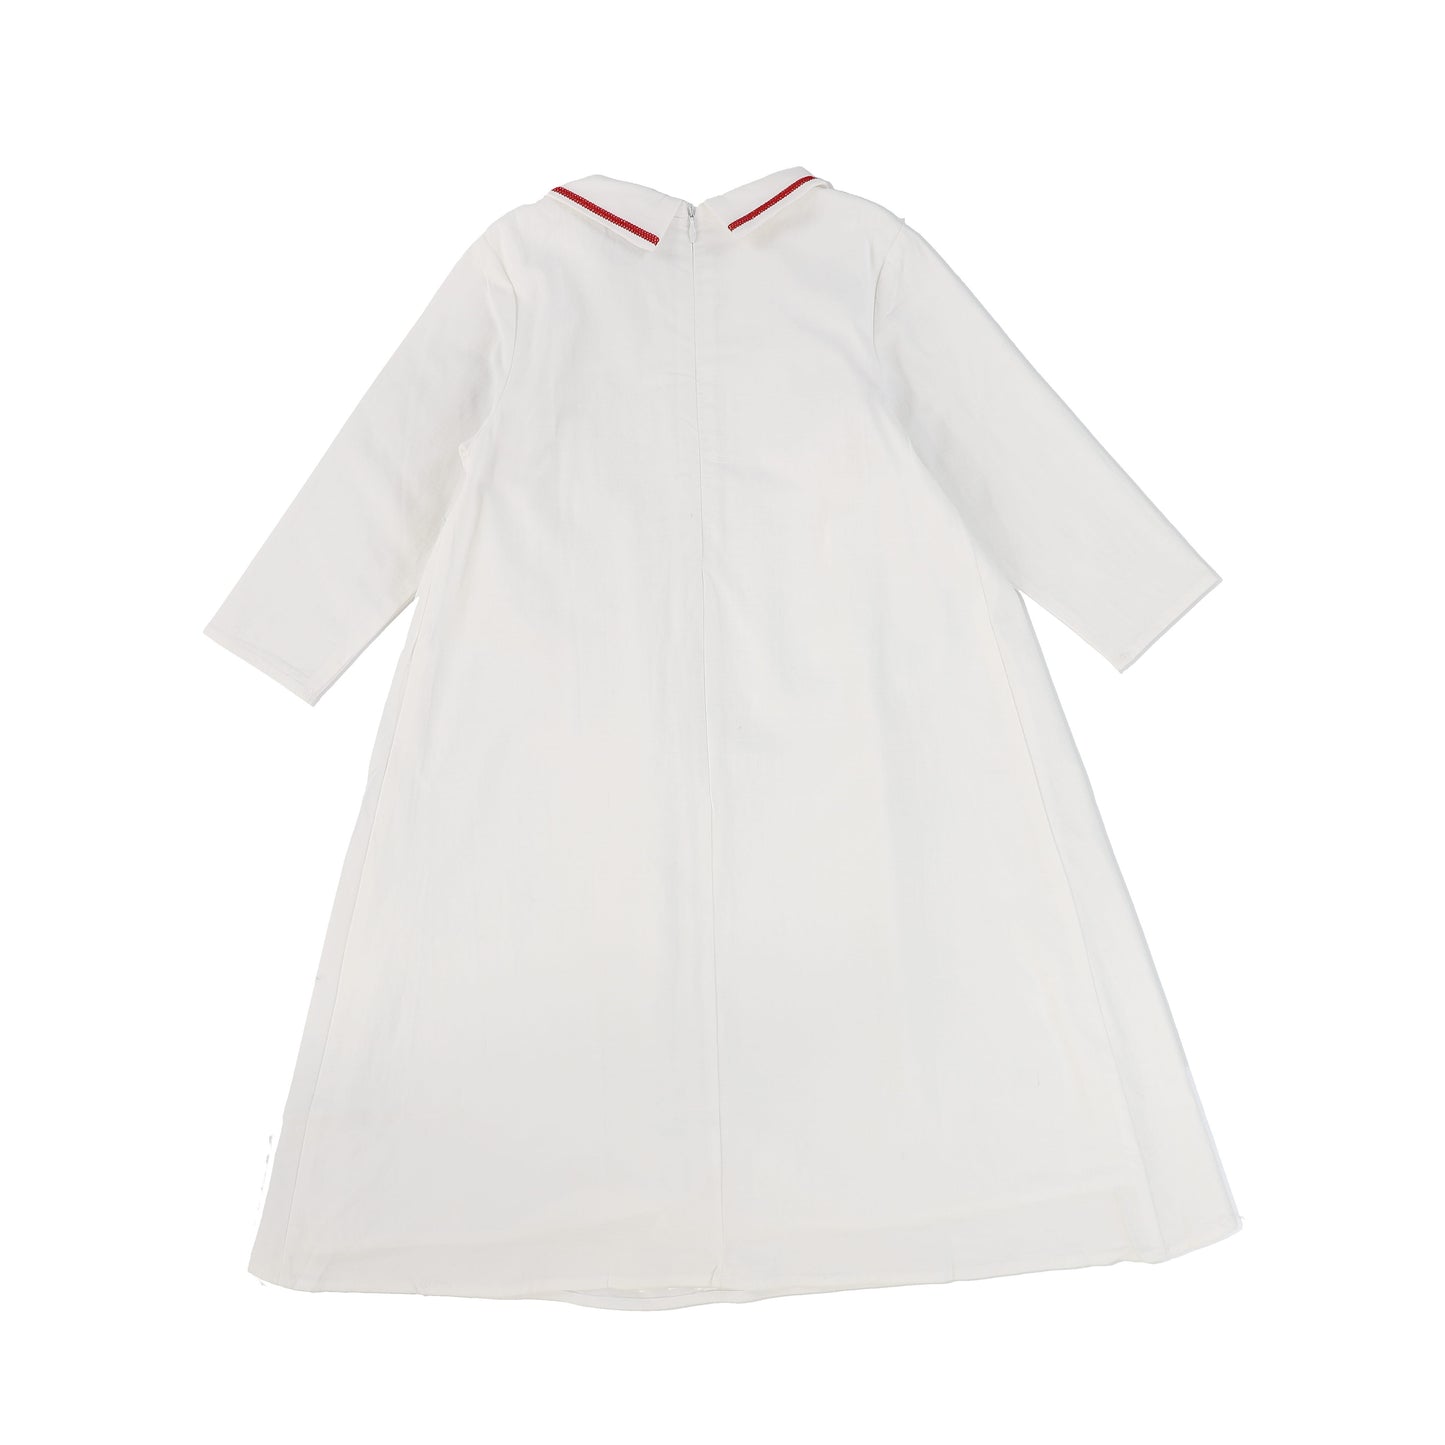 BACE COLLECTION WHITE SMOCKED COLLAR DRESS